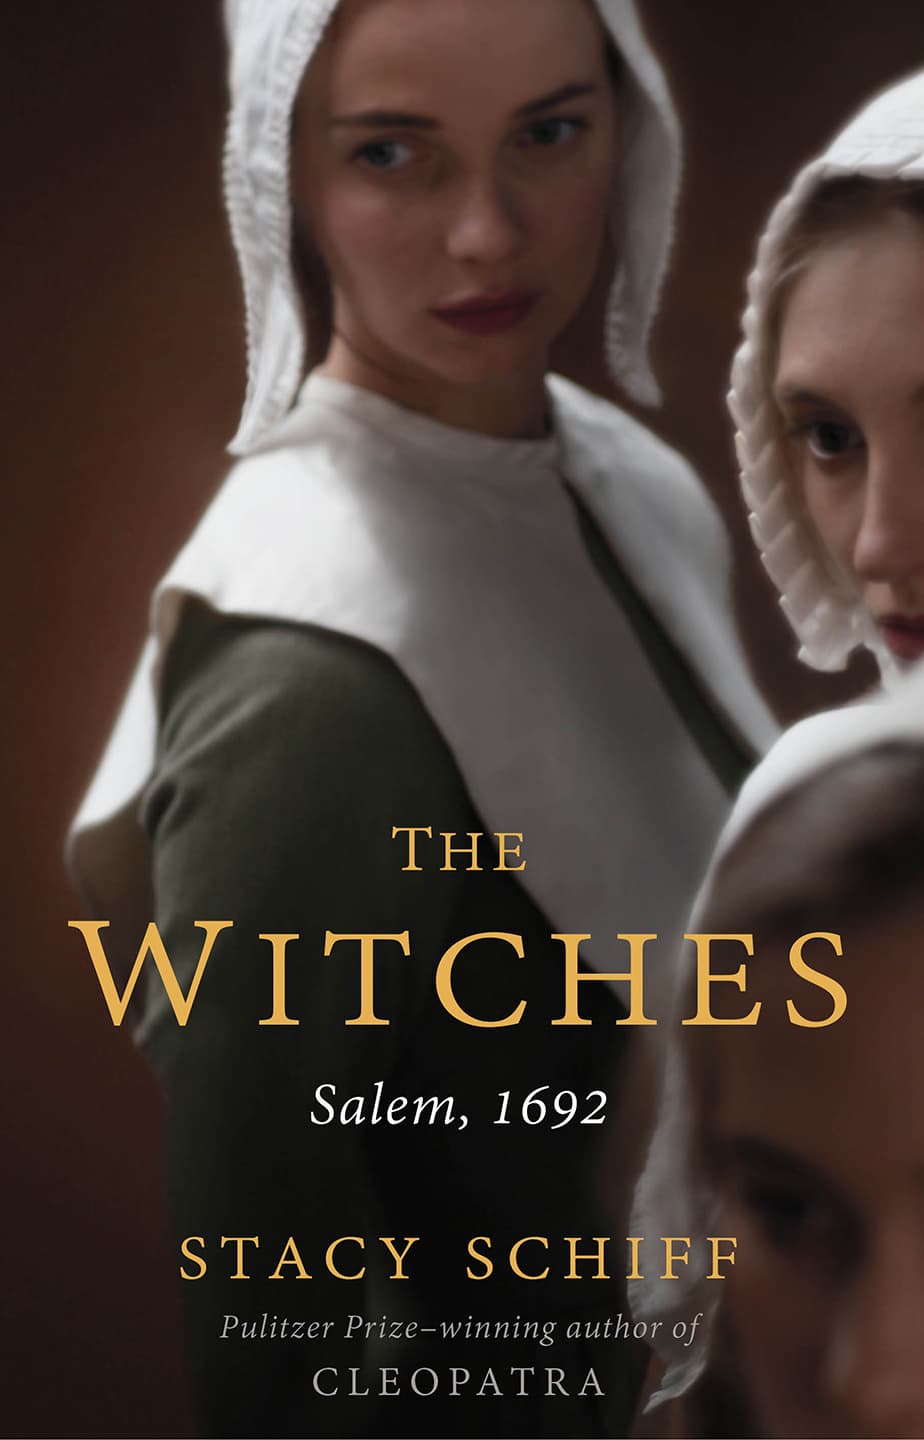 The Twisted Story Of The Salem Witch Trials | Radio Boston